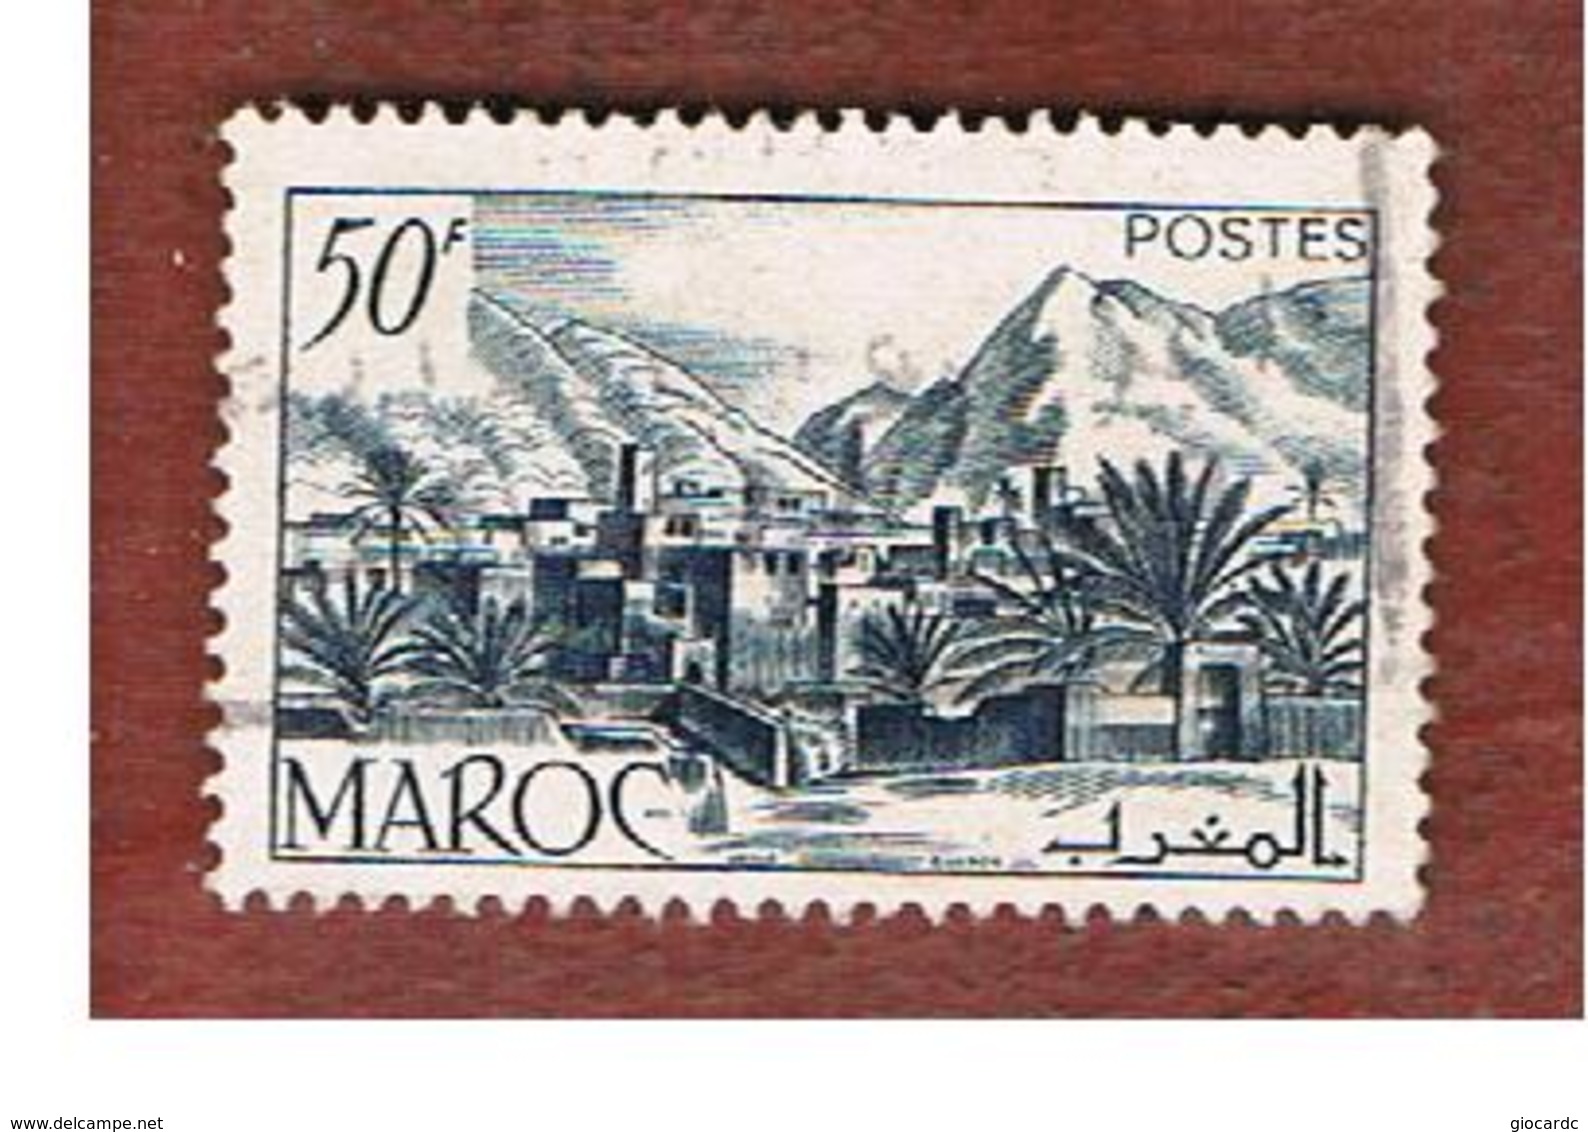 MAROCCO FRANCESE (FRENCH MOROCCO)  - SG 337e  -  1950  TODRA VALLEY  50  - USED ° - Usati